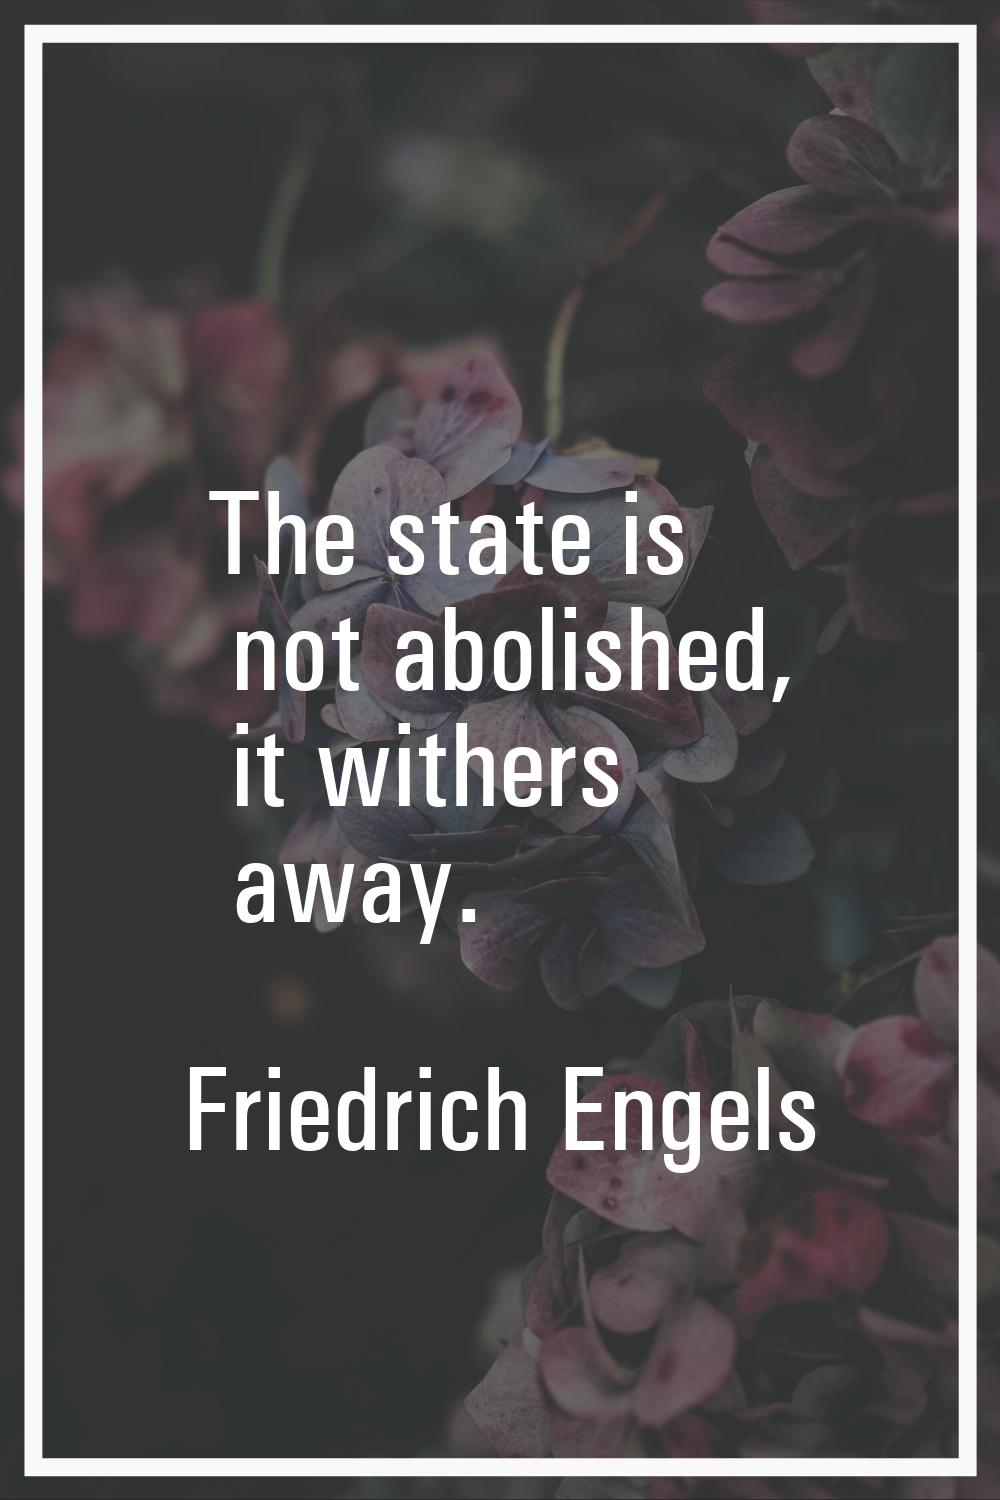 The state is not abolished, it withers away.